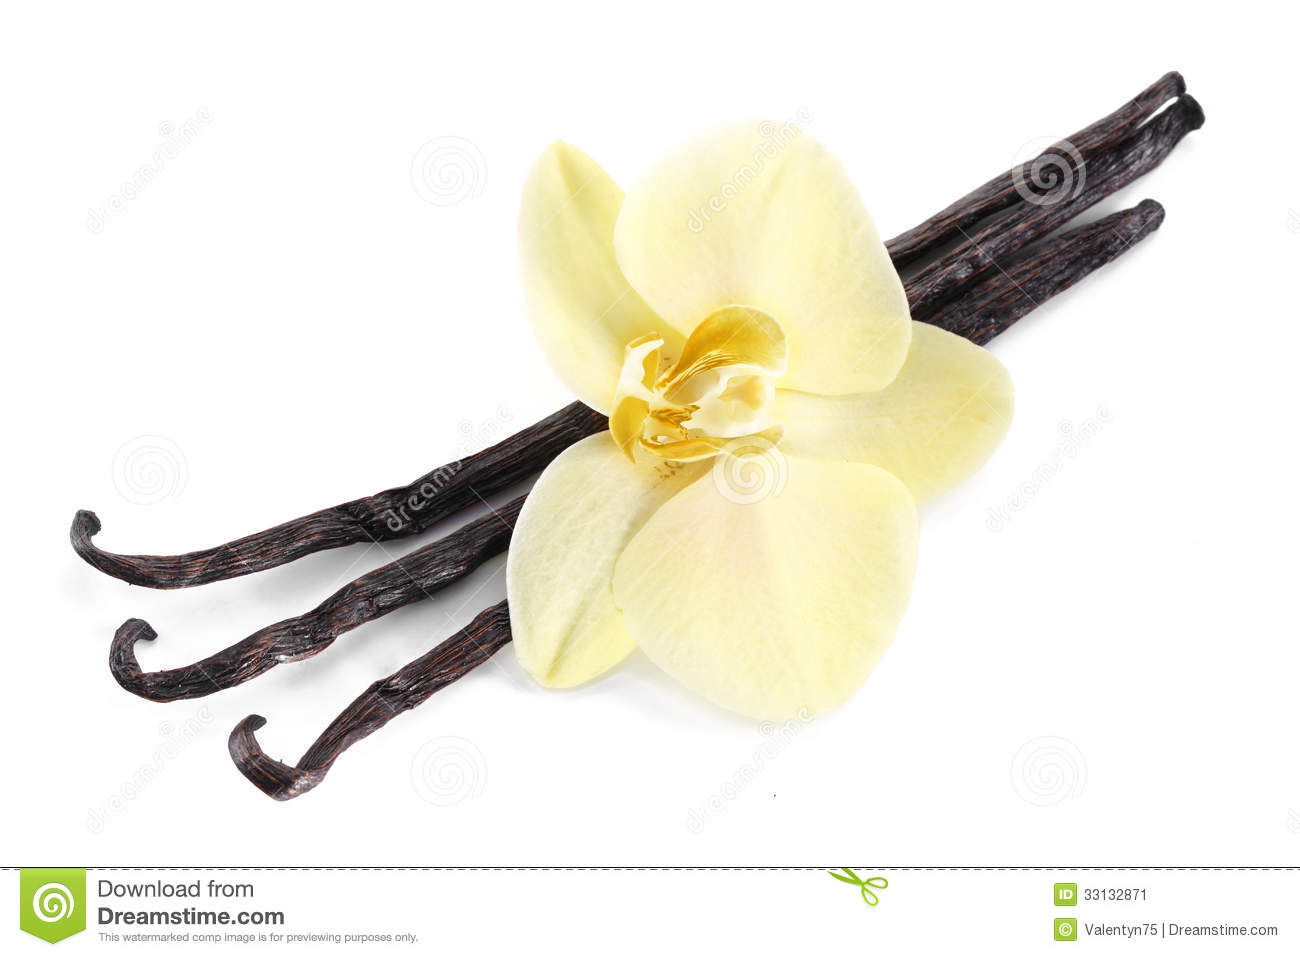 Vanilla Sticks With A Flower  Stock Image   Image  33132871